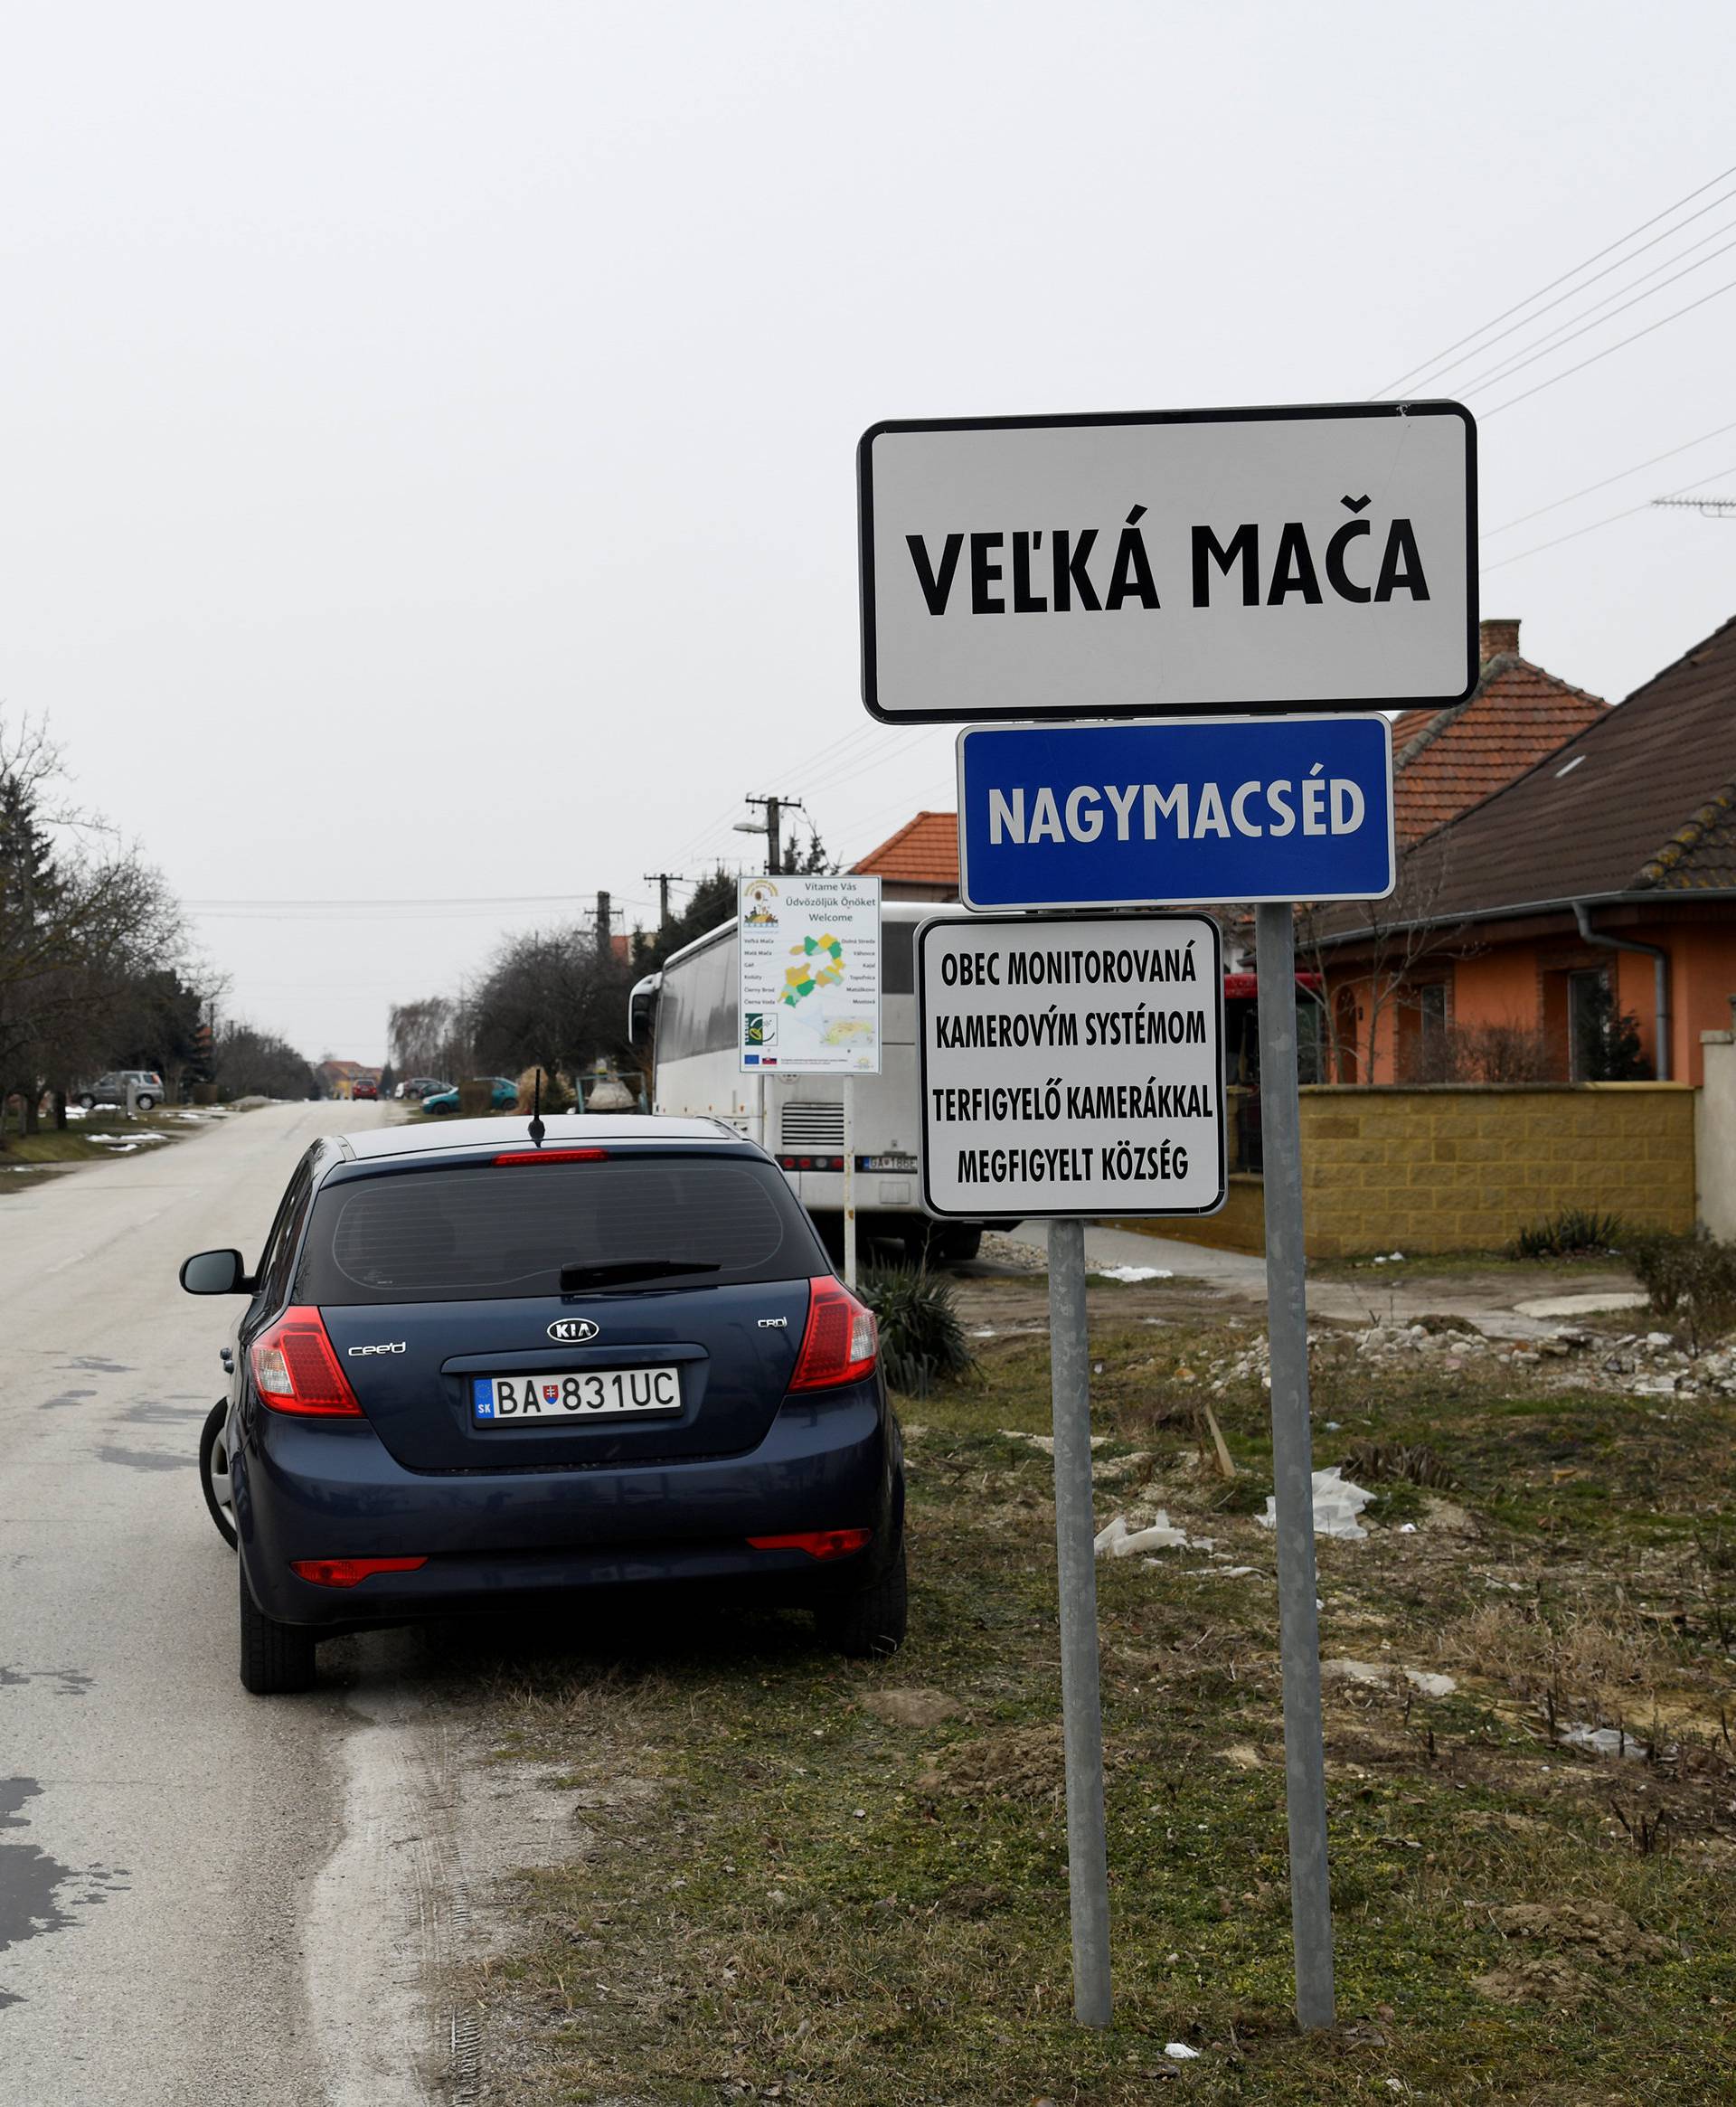 The main road of the village where Slovak investigative journalist Jan Kuciak and his girlfriend Martina Kusnirova lived and were murdered is seen in the village of Velka Maca